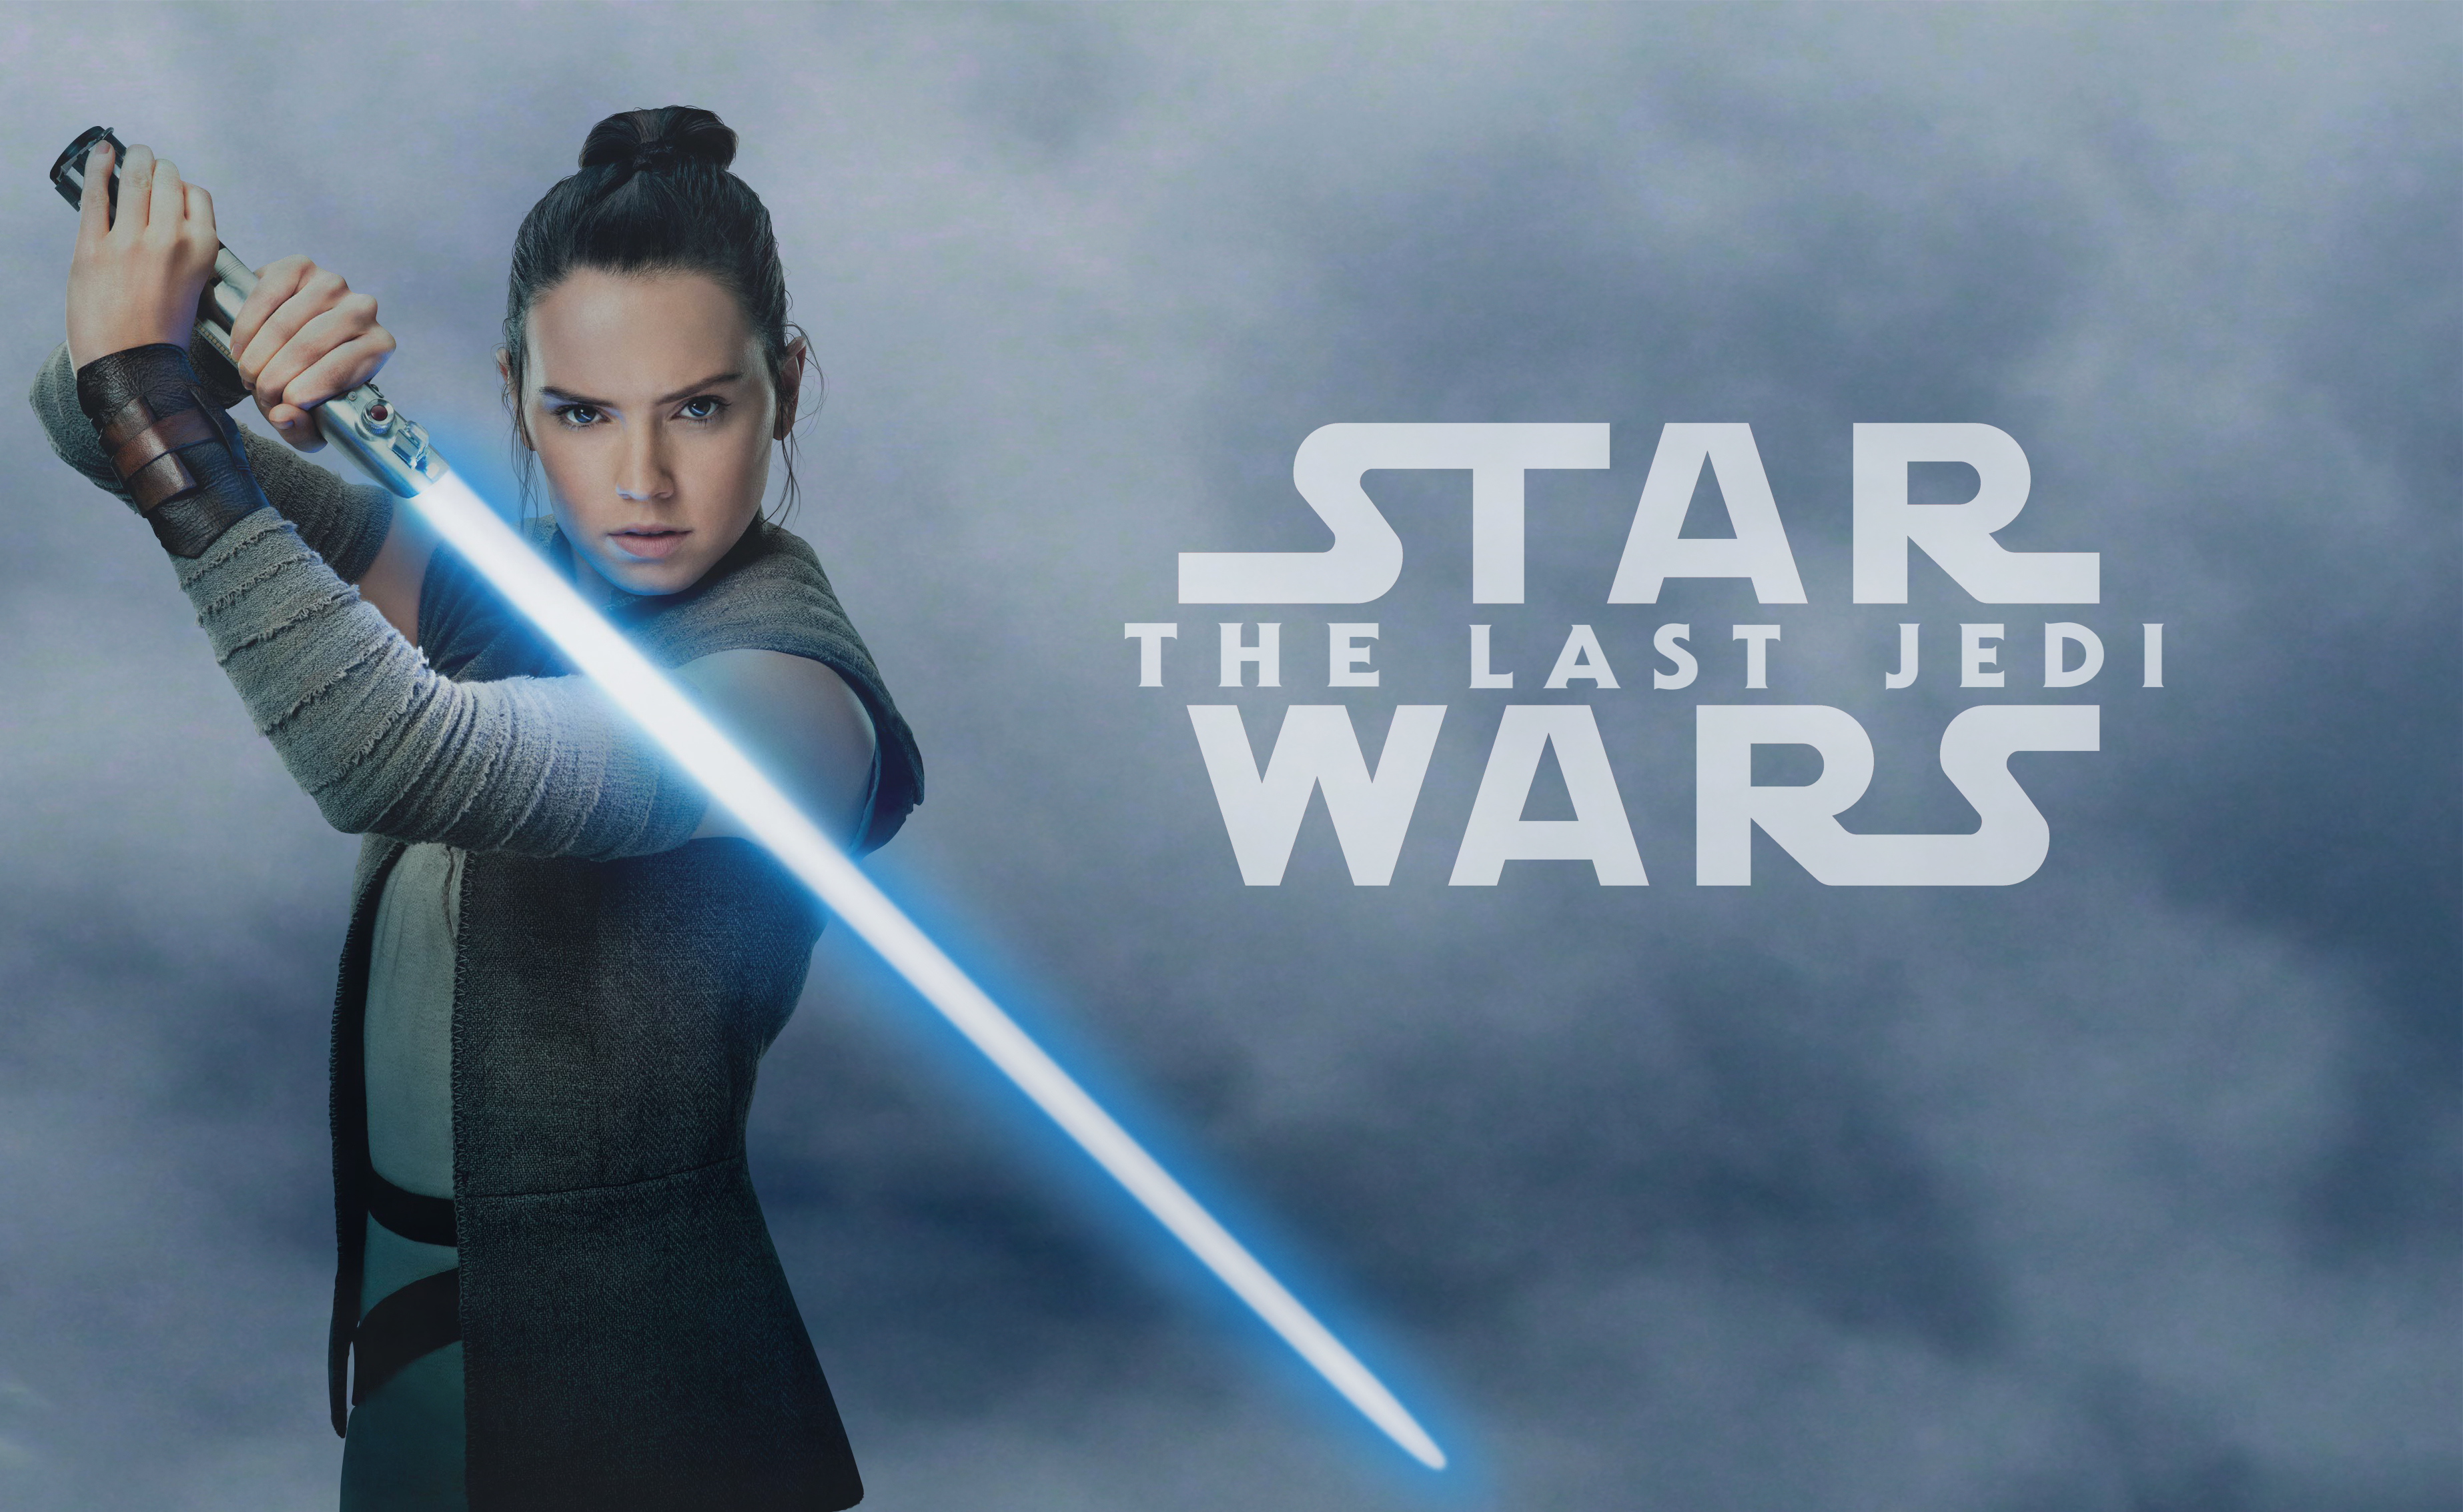 People 3692x2267 Star Wars: The Last Jedi Daisy Ridley Rey (Star Wars) lightsaber women movies movie characters actress